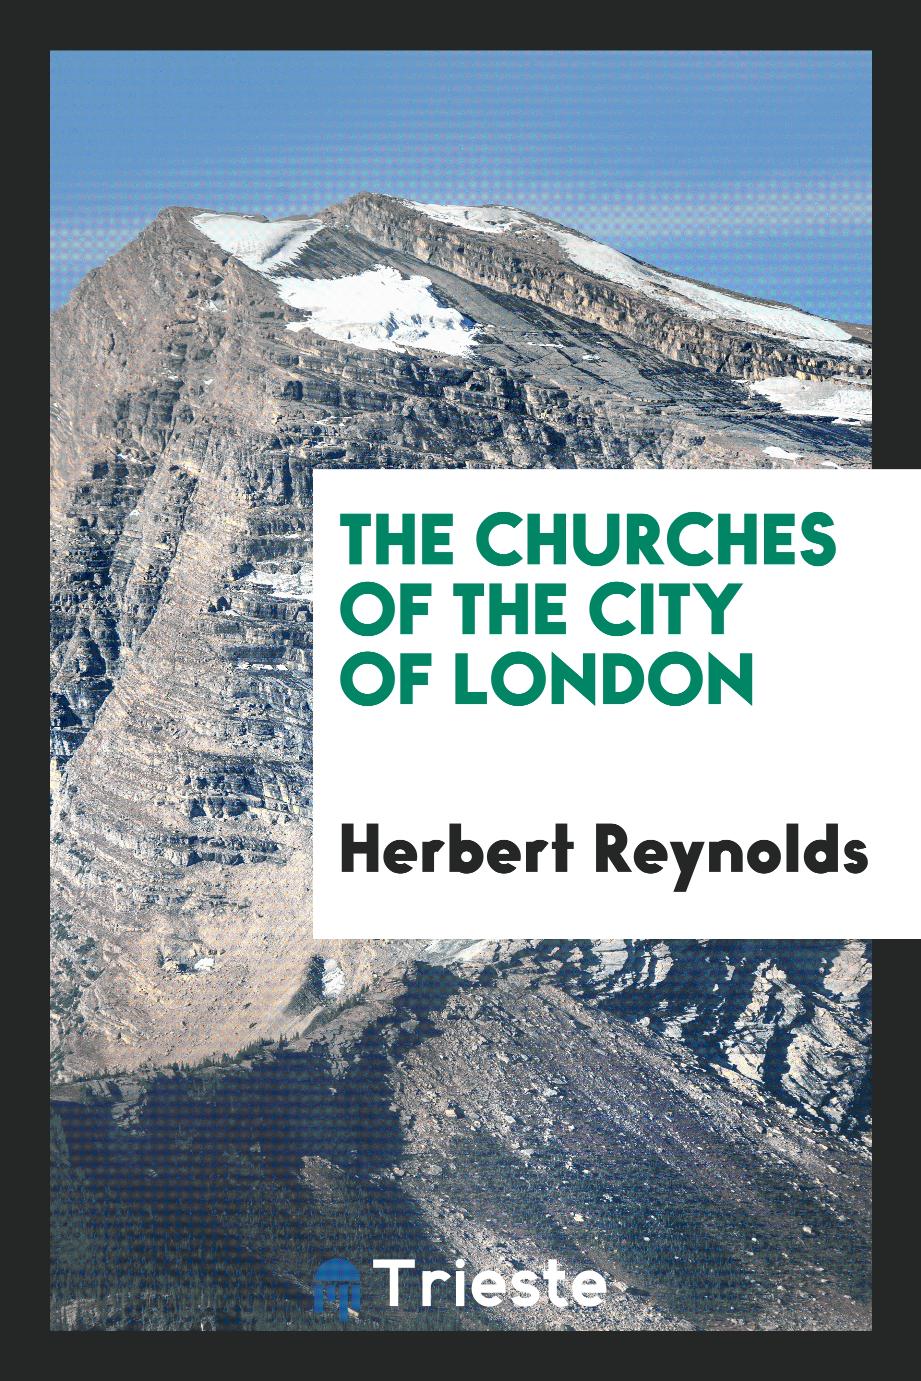 The churches of the city of London